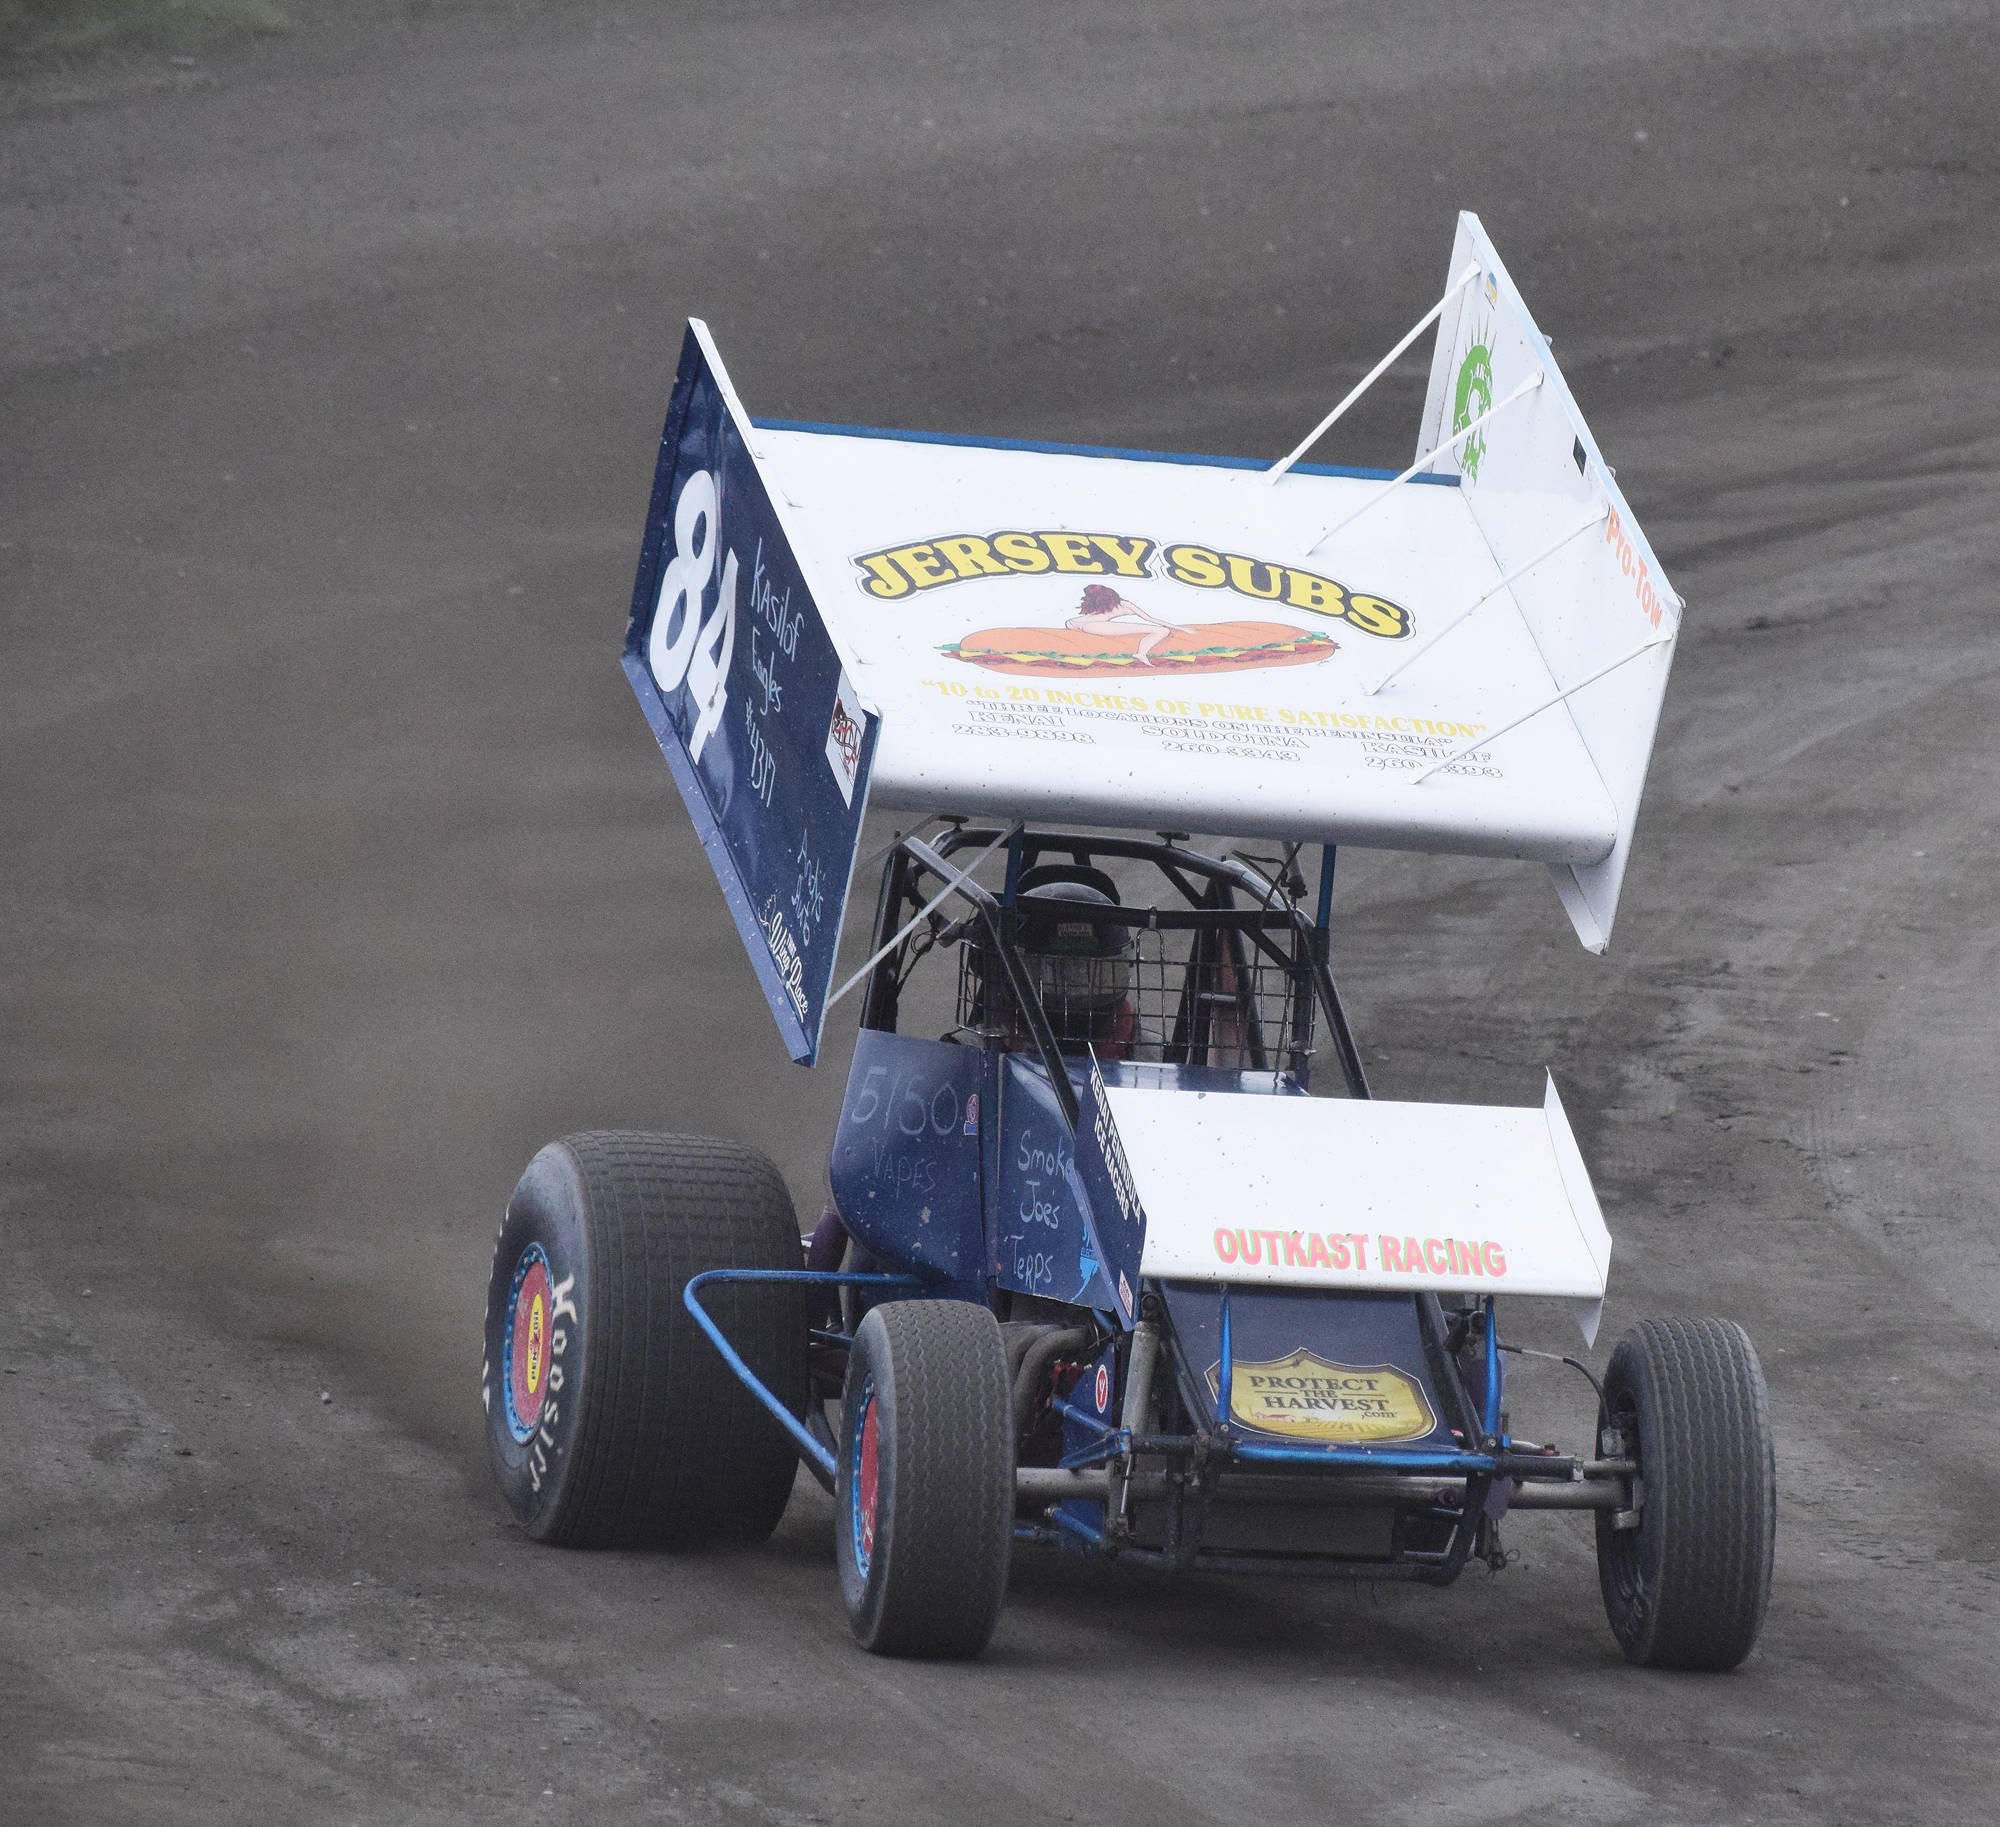 The No. 84 Sprint Car of Jimmie Hale slides through a curve Saturday night at Twin City Raceway in Kenai. (Photo by Joey Klecka/Peninsula Clarion)